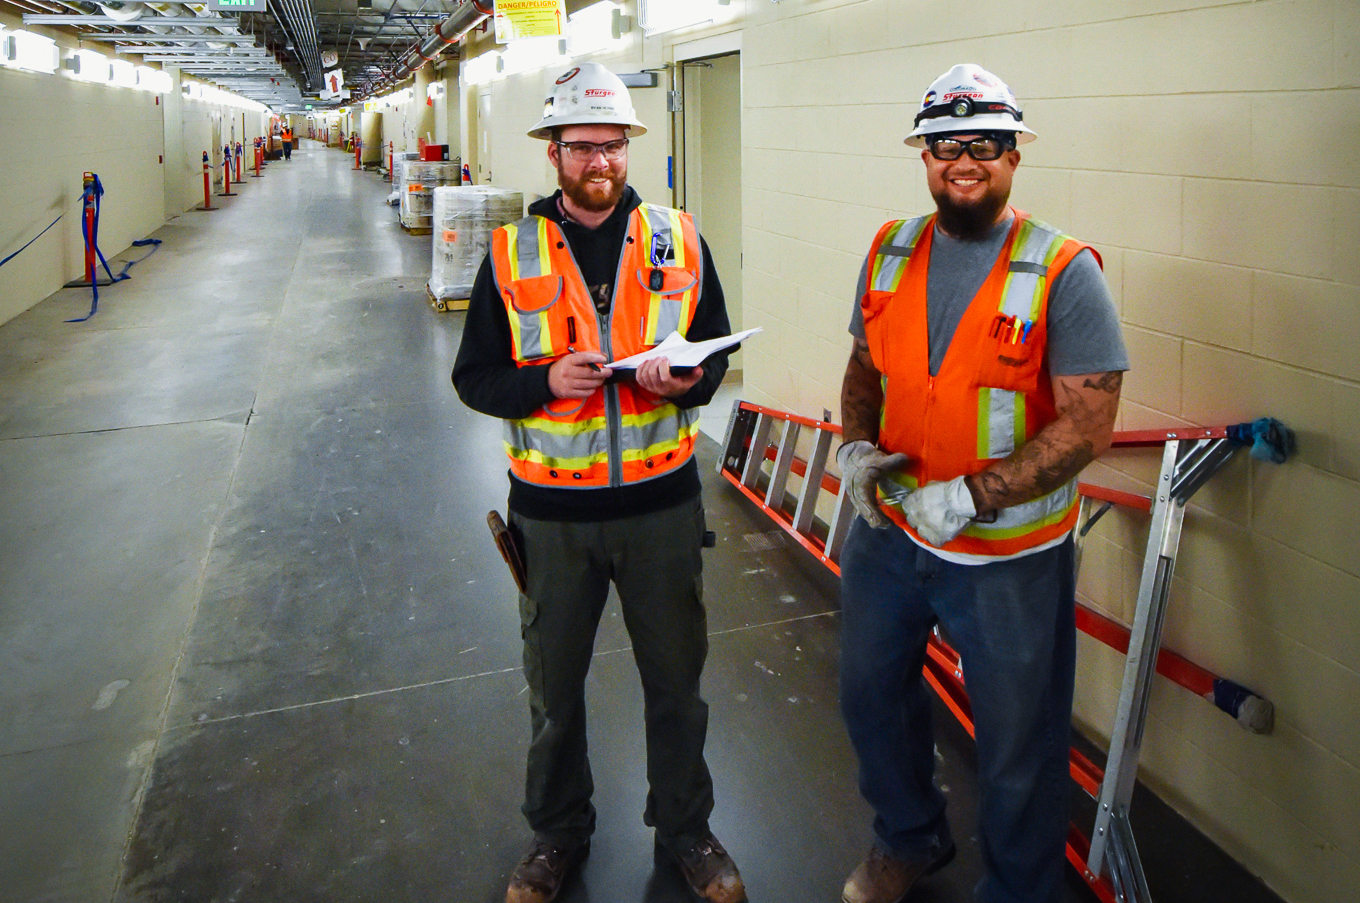 Two Sturgeon Electric employees in a utility hallway smile for the camera